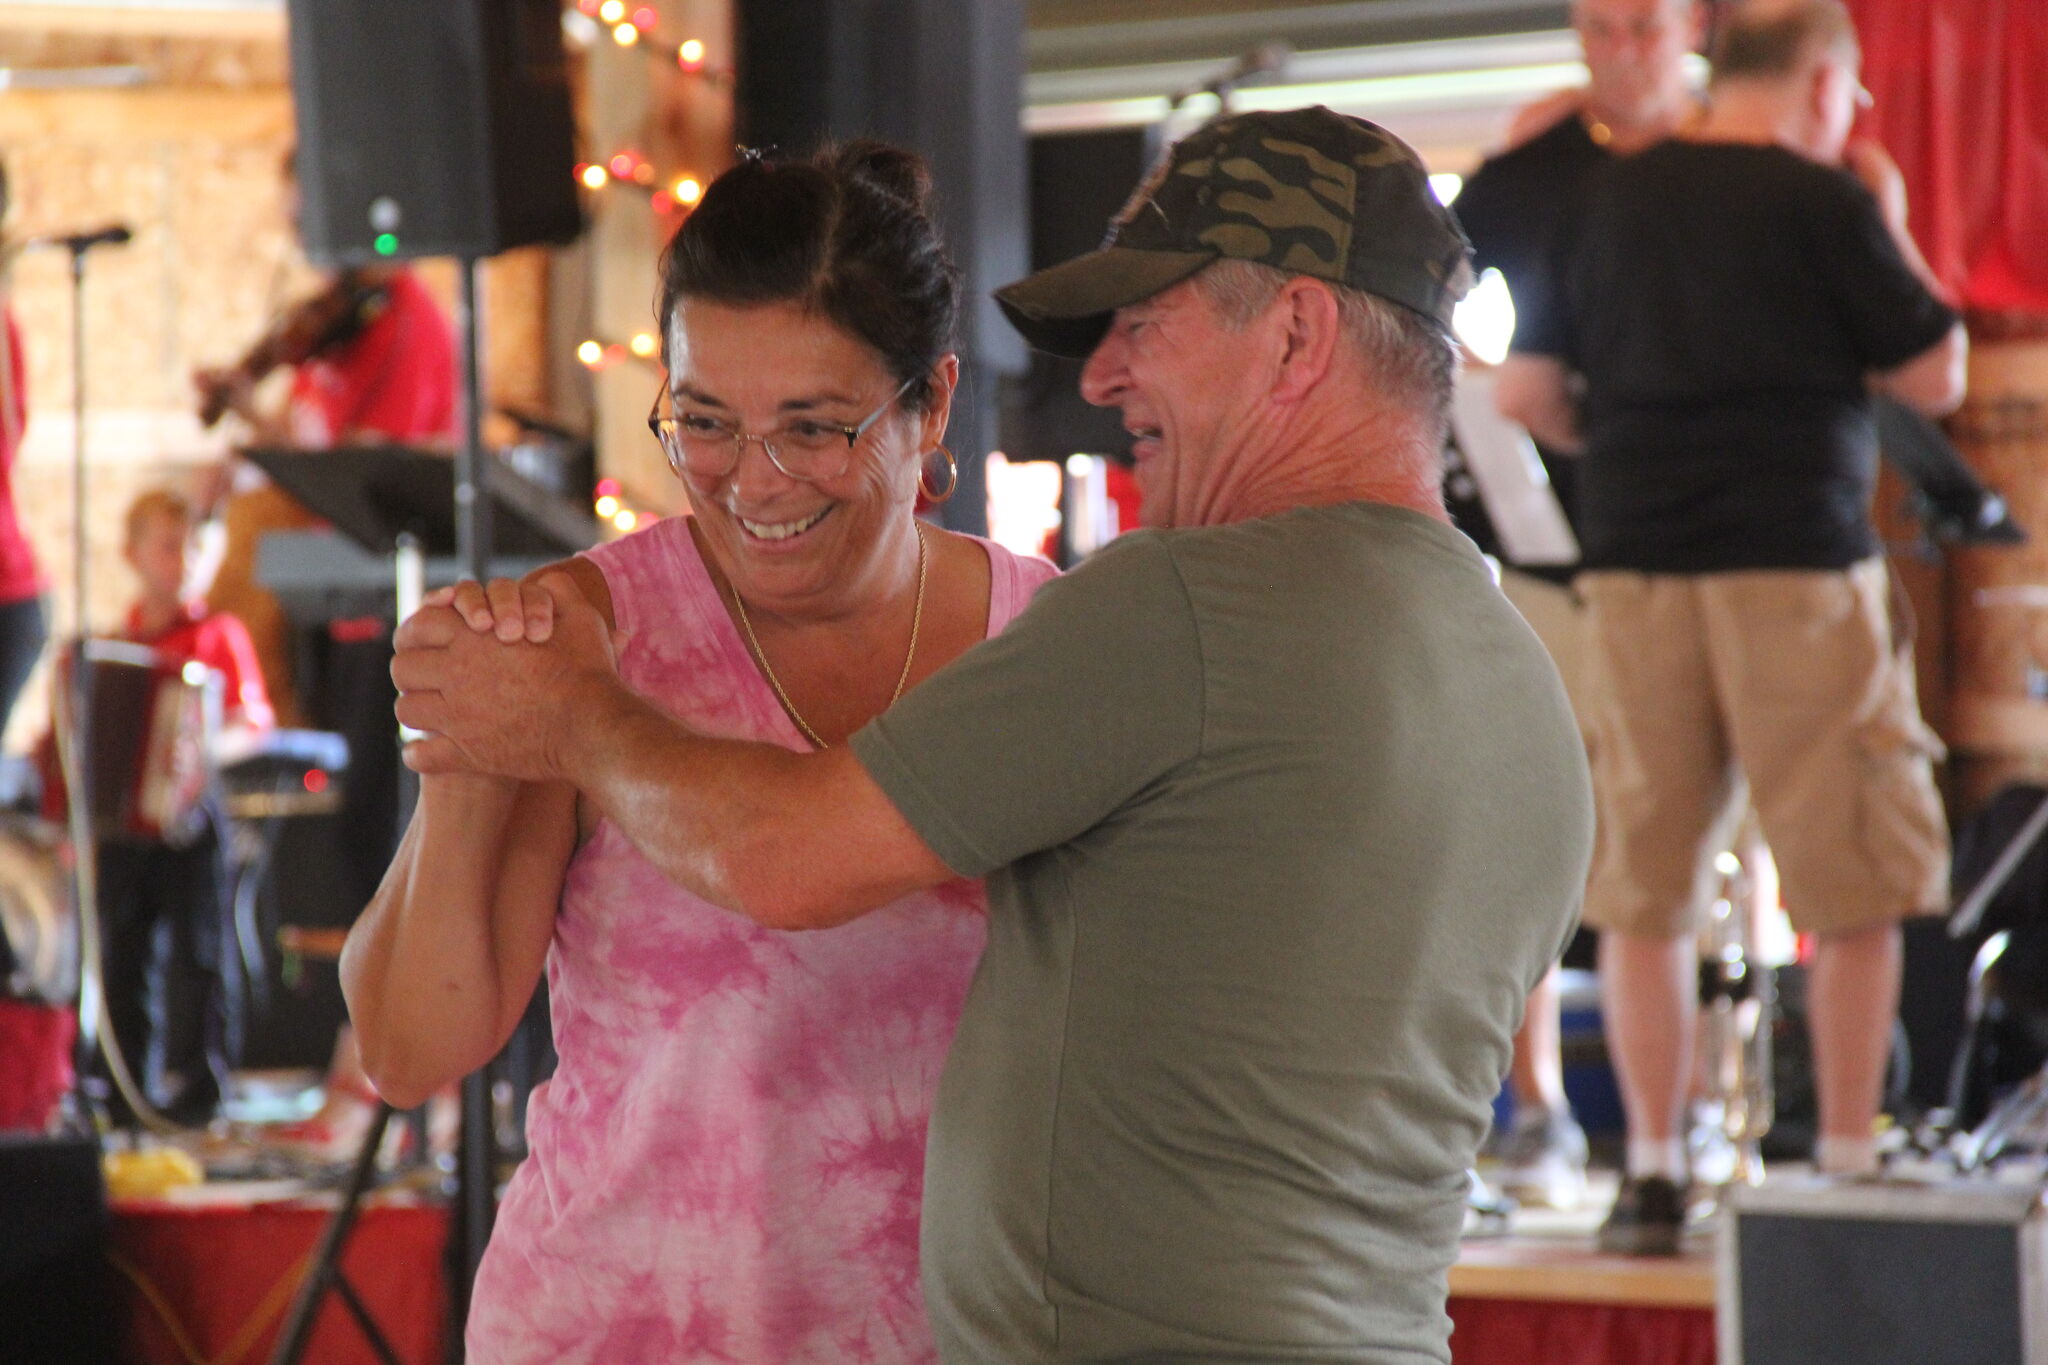 Village of Kinde back guests attending their annual Polka Festival